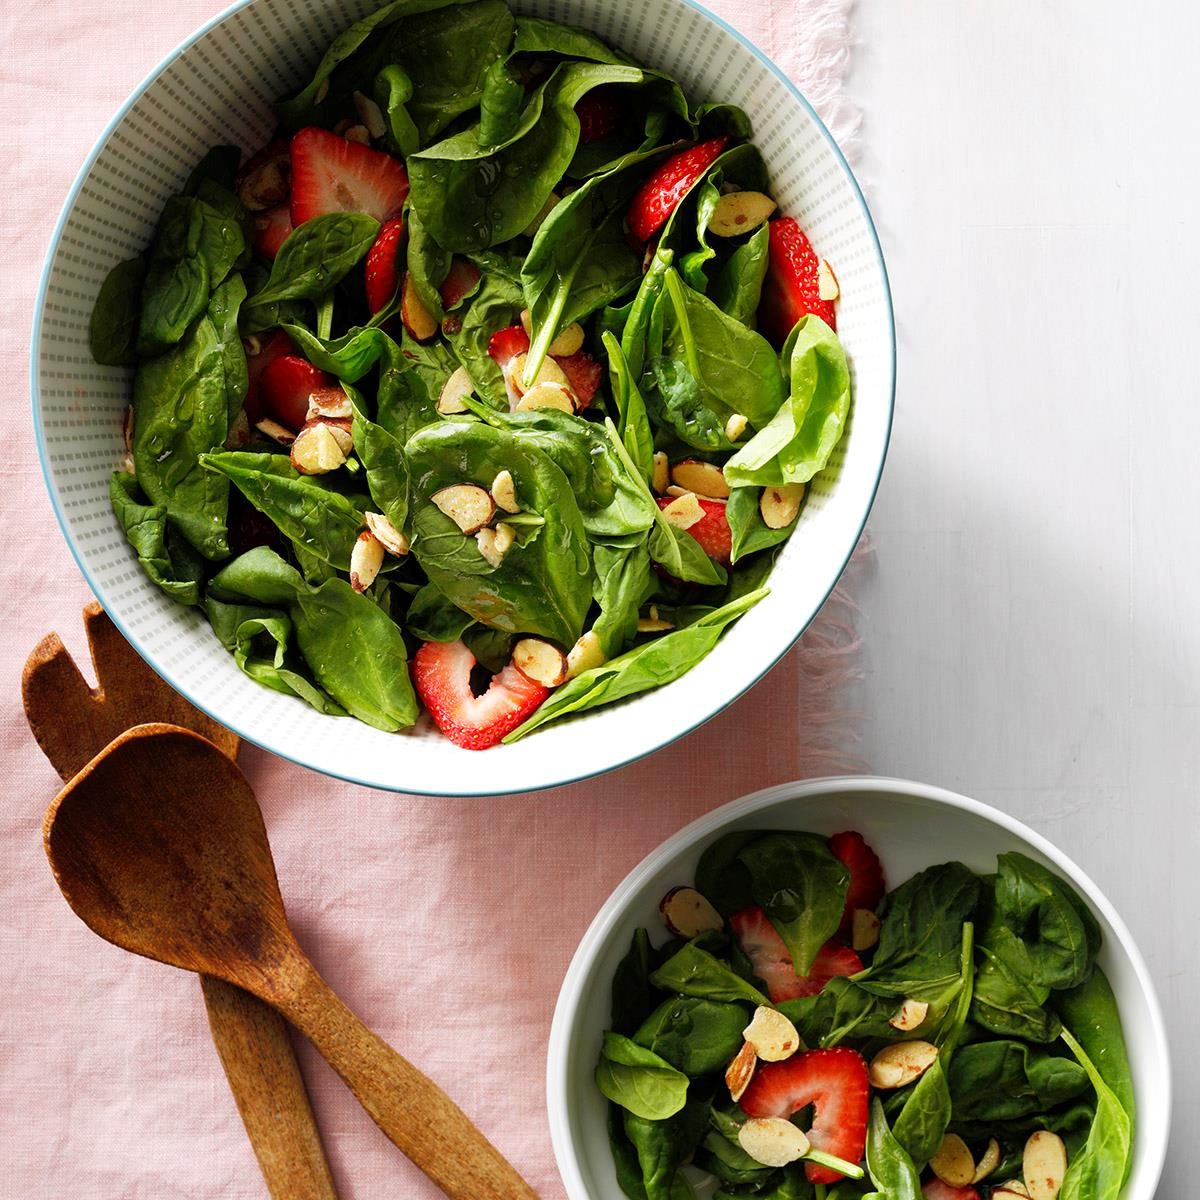 <p>It's easy to love this pretty salad topped with strawberries and sliced almonds. With just a few ingredients, it's loaded with flavor. —Renae Rossow, Union, Kentucky</p> <div class="listicle-page__buttons"> <div class="listicle-page__cta-button"><a href='https://www.tasteofhome.com/recipes/almond-strawberry-salad/'>Go to Recipe</a></div> </div>